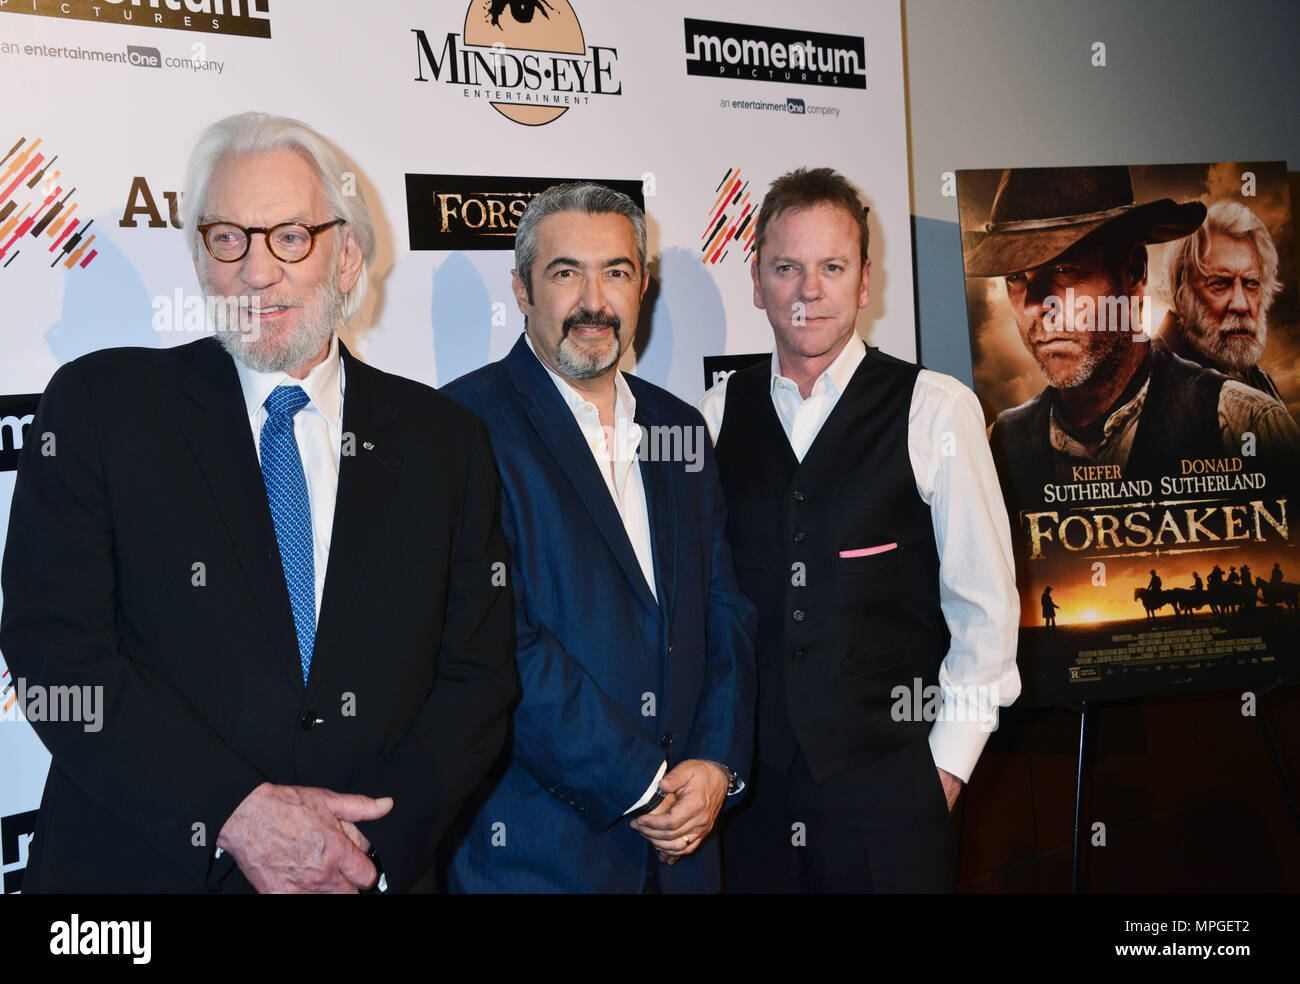 Donald Sutherland, Kiefer Sutherland and John Cassar - director 134 at Forsaken Premiere at the Autry Museum in Los Angeles. February 16, 2016.Donald Sutherland, Kiefer Sutherland and John Cassar - director 134  Event in Hollywood Life - California, Red Carpet Event, USA, Film Industry, Celebrities, Photography, Bestof, Arts Culture and Entertainment, Topix Celebrities fashion, Best of, Hollywood Life, Event in Hollywood Life - California, Red Carpet and backstage, movie celebrities, TV celebrities, Music celebrities, Arts Culture and Entertainment, vertical, one person, Photography,    inquir Stock Photo